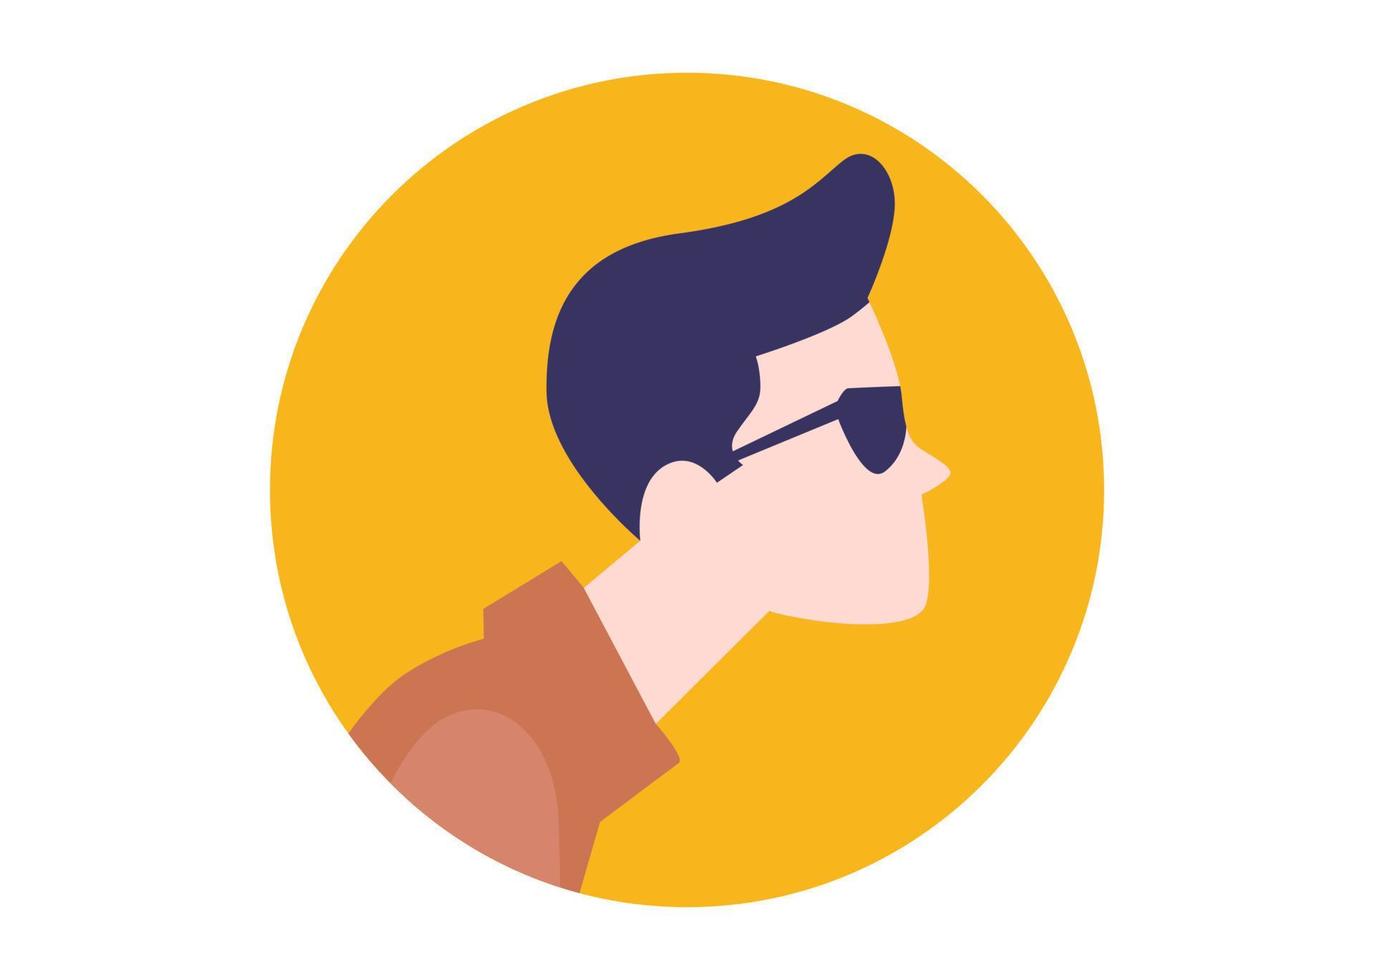 young male face illustration design with glasses vector